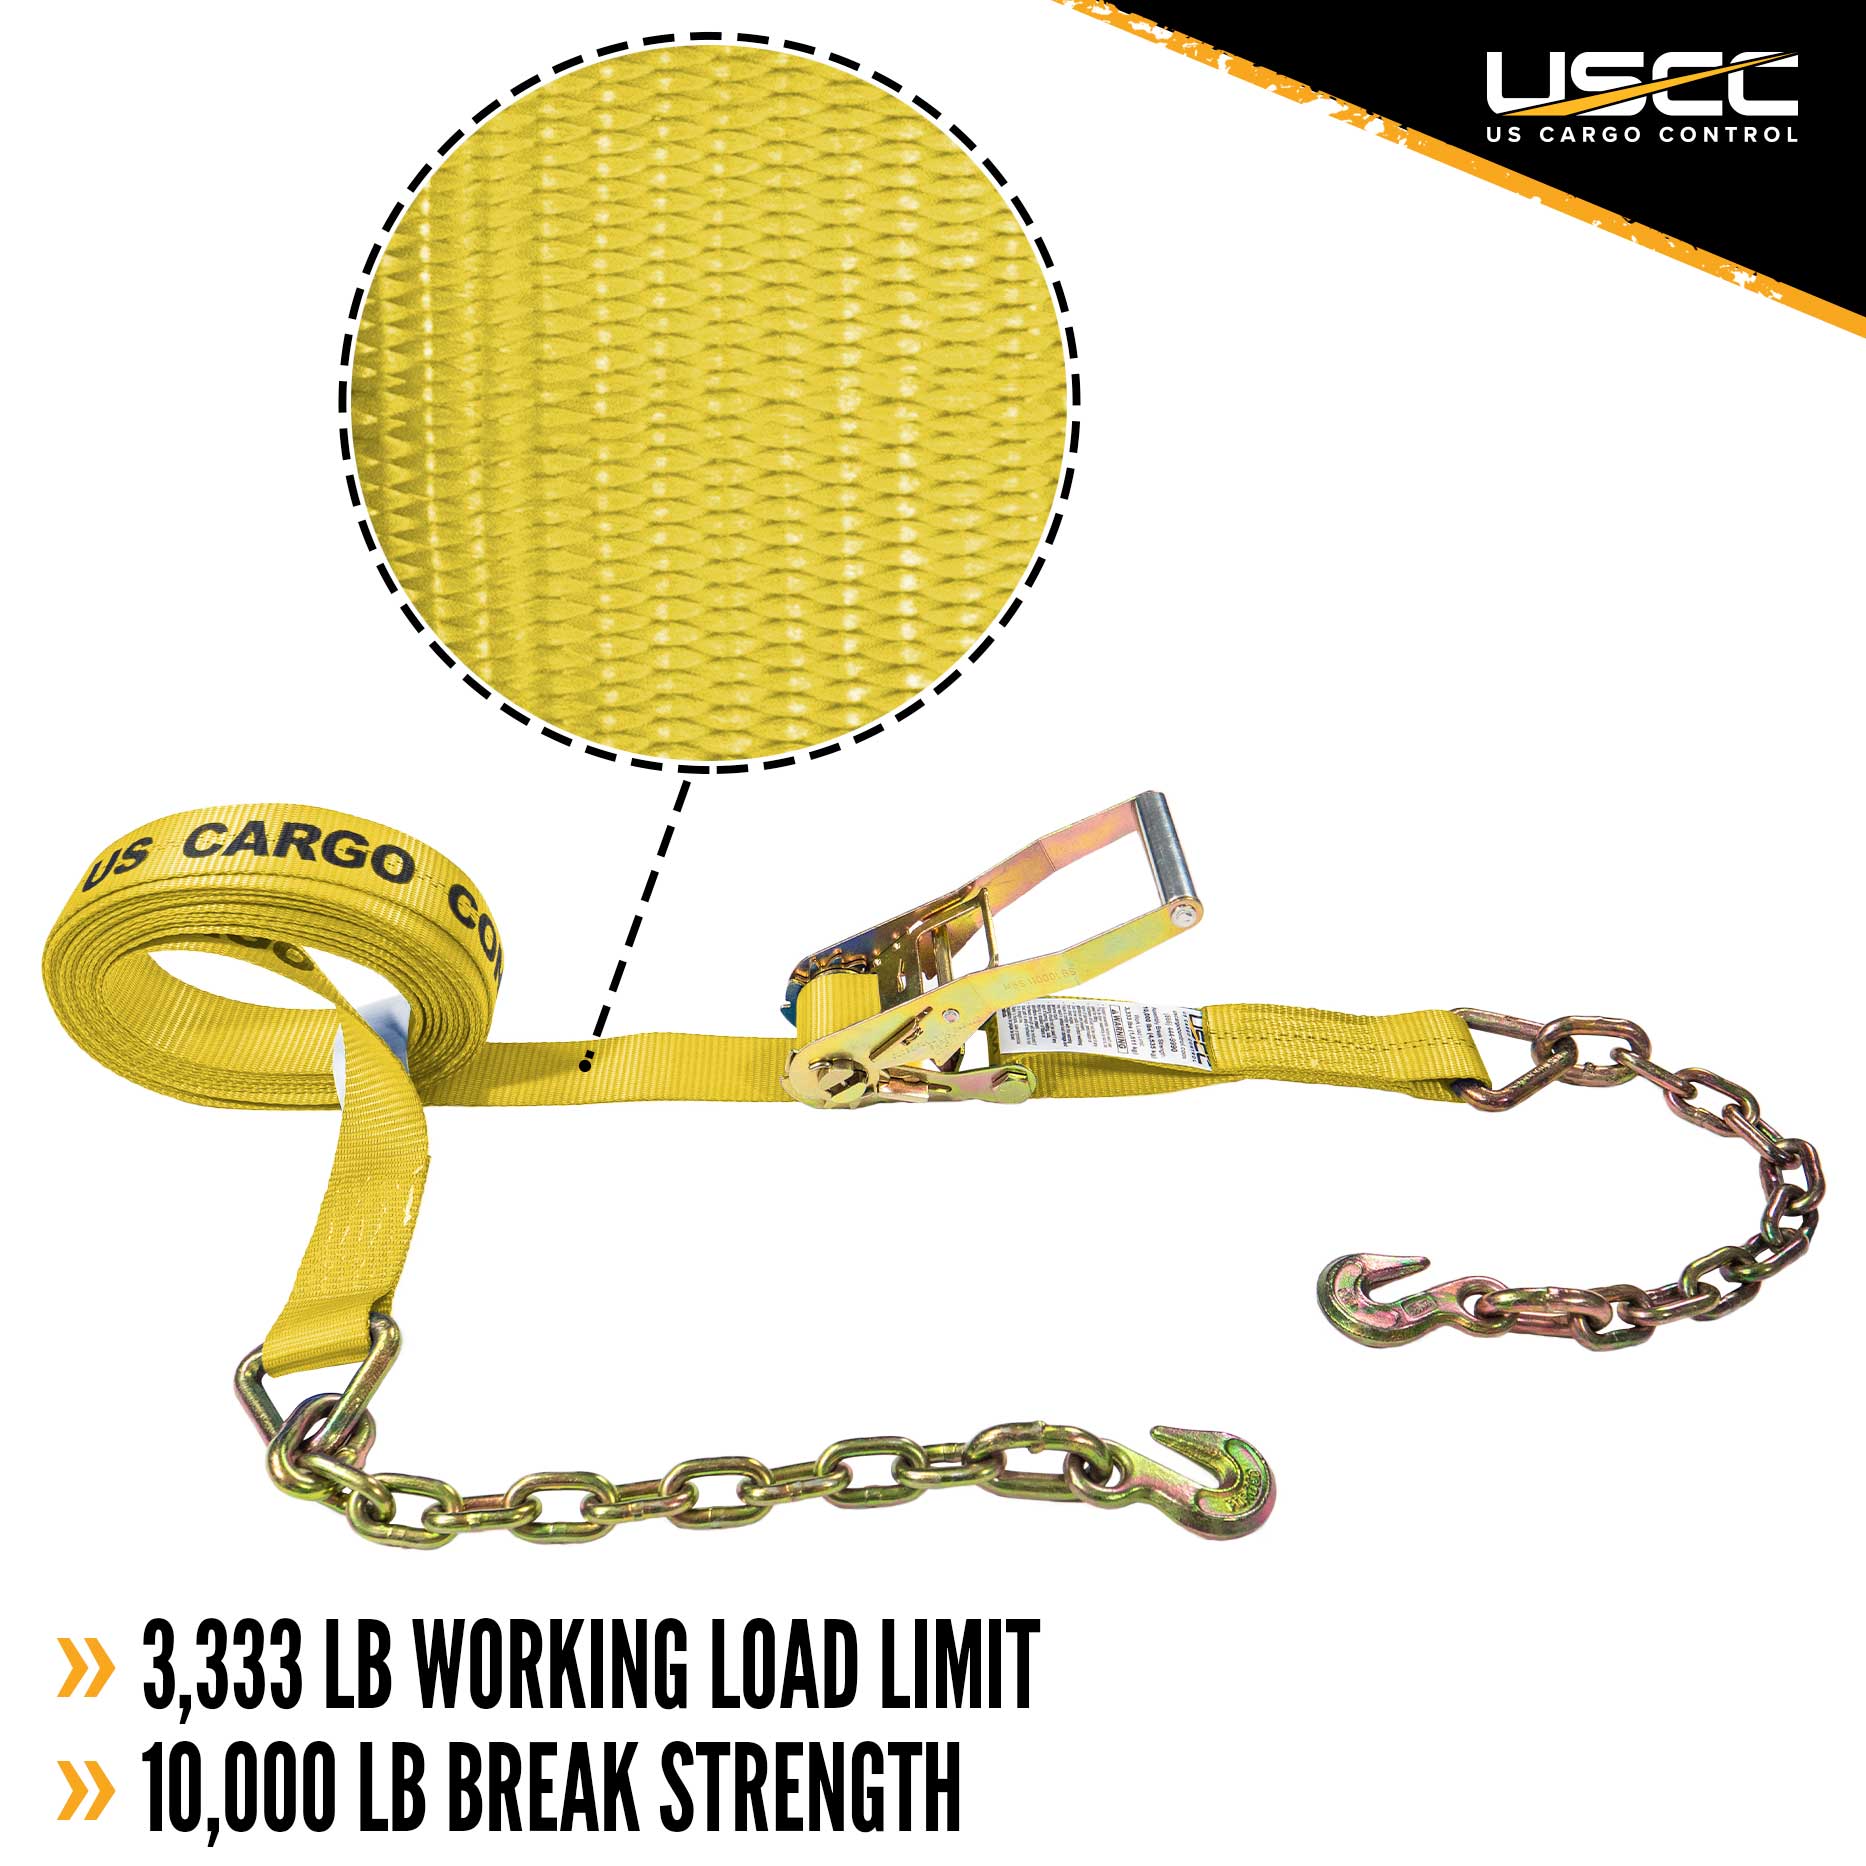 2" x 30' Yellow Ratchet Strap w/ Chain Extension